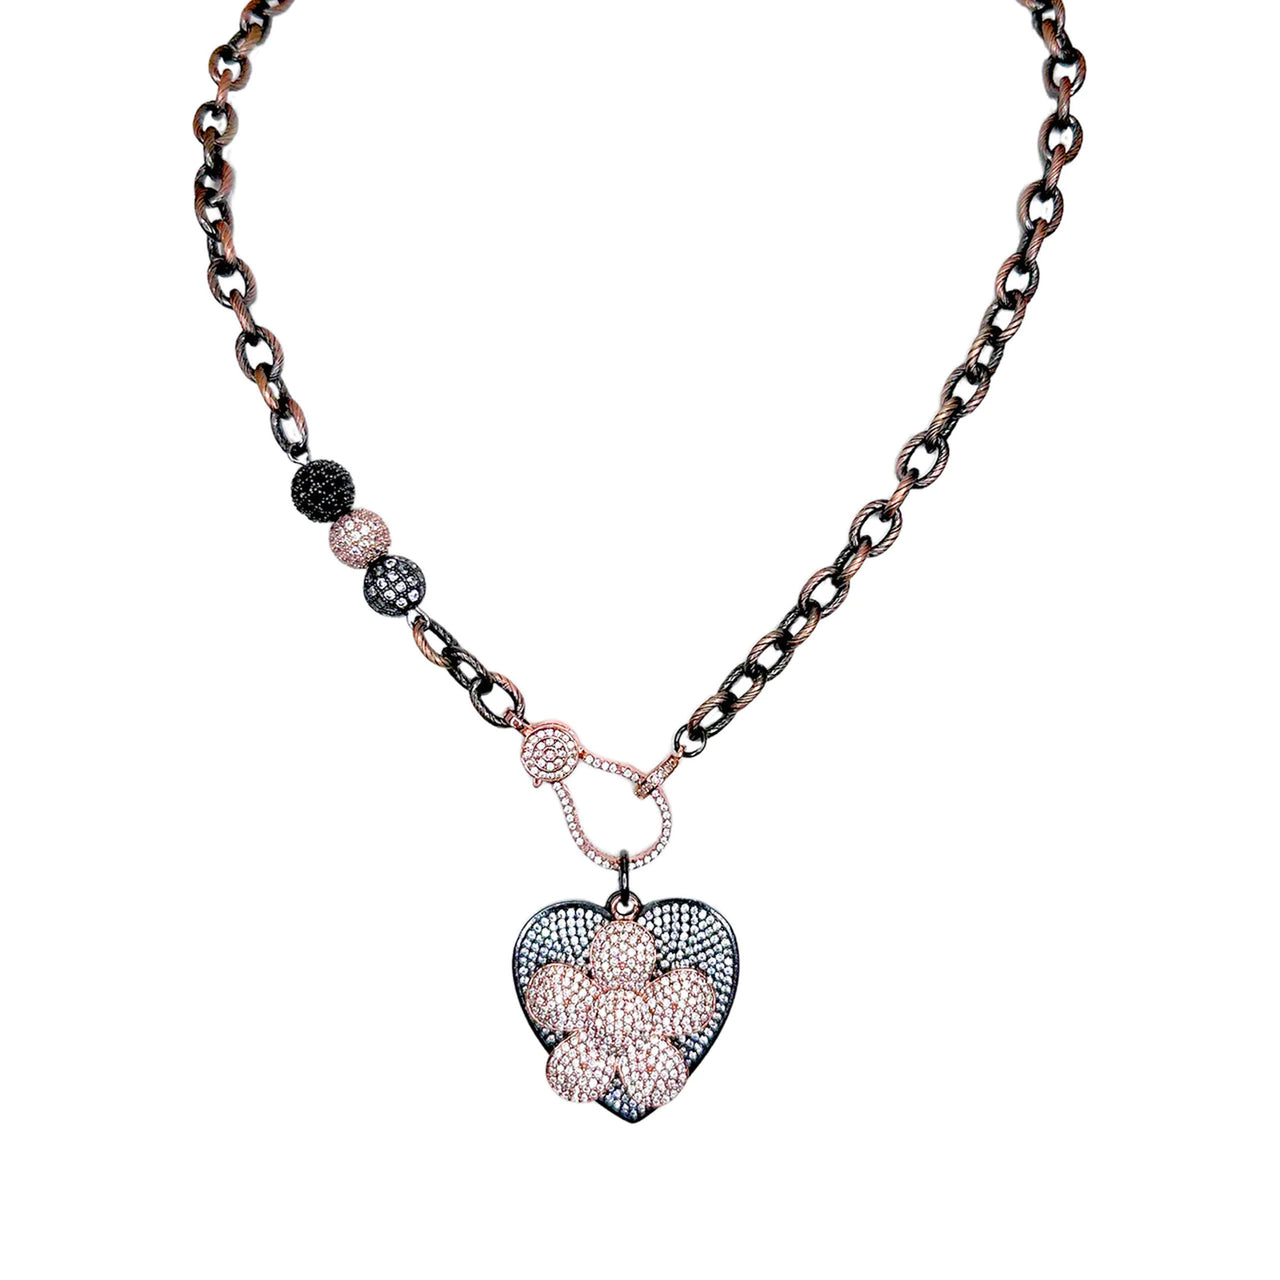 Bethany's Flower Heart Necklace